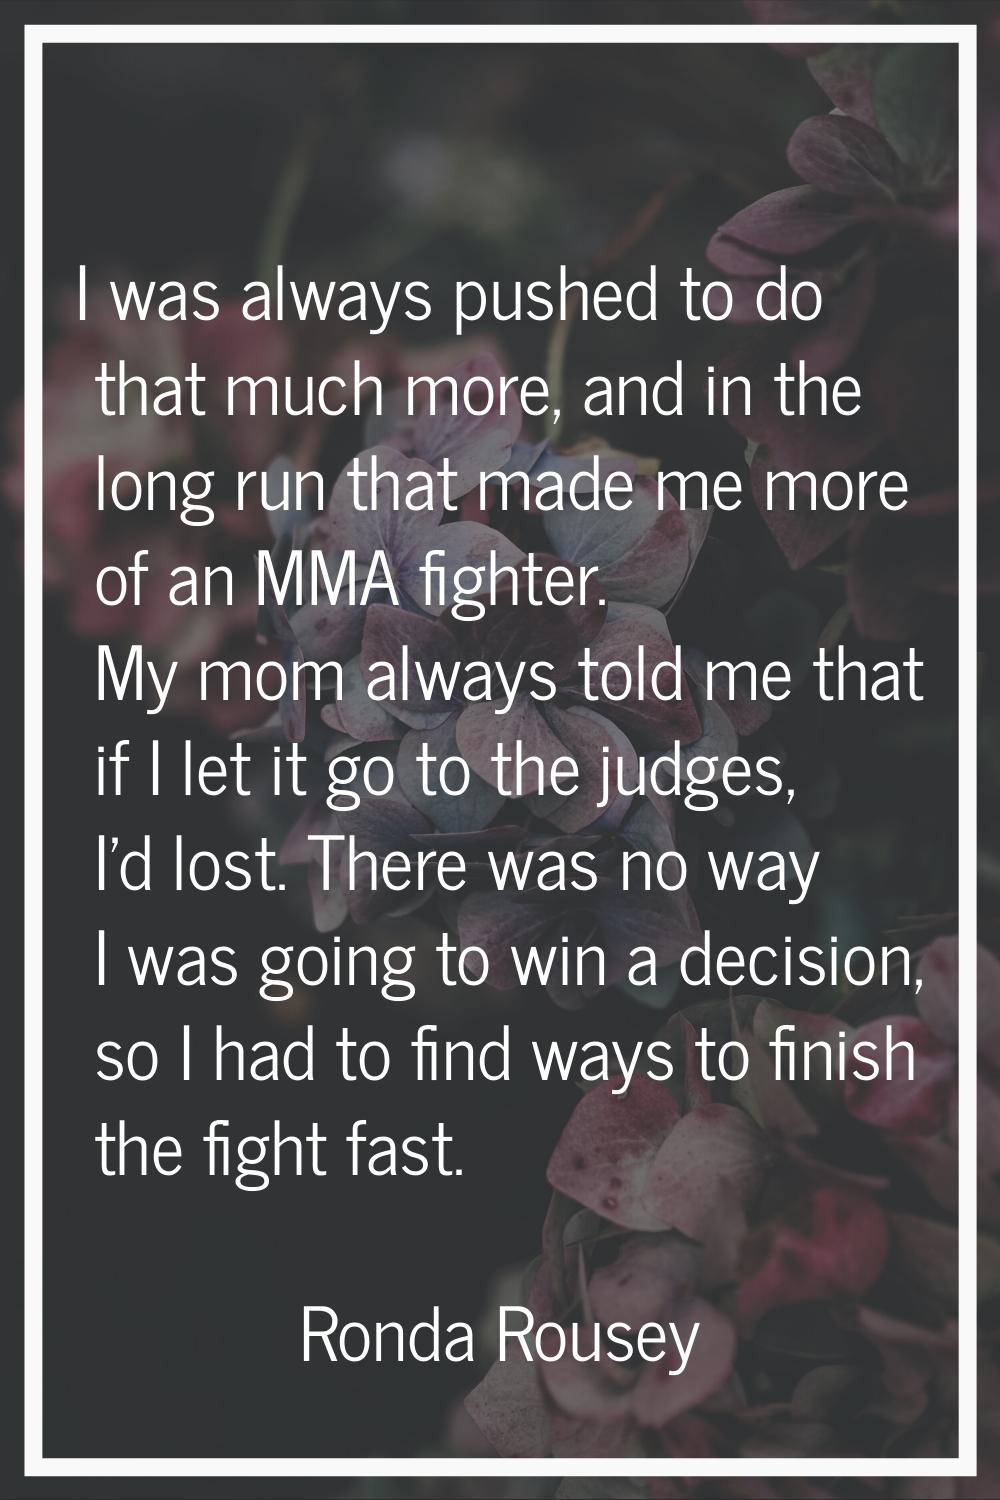 I was always pushed to do that much more, and in the long run that made me more of an MMA fighter. 